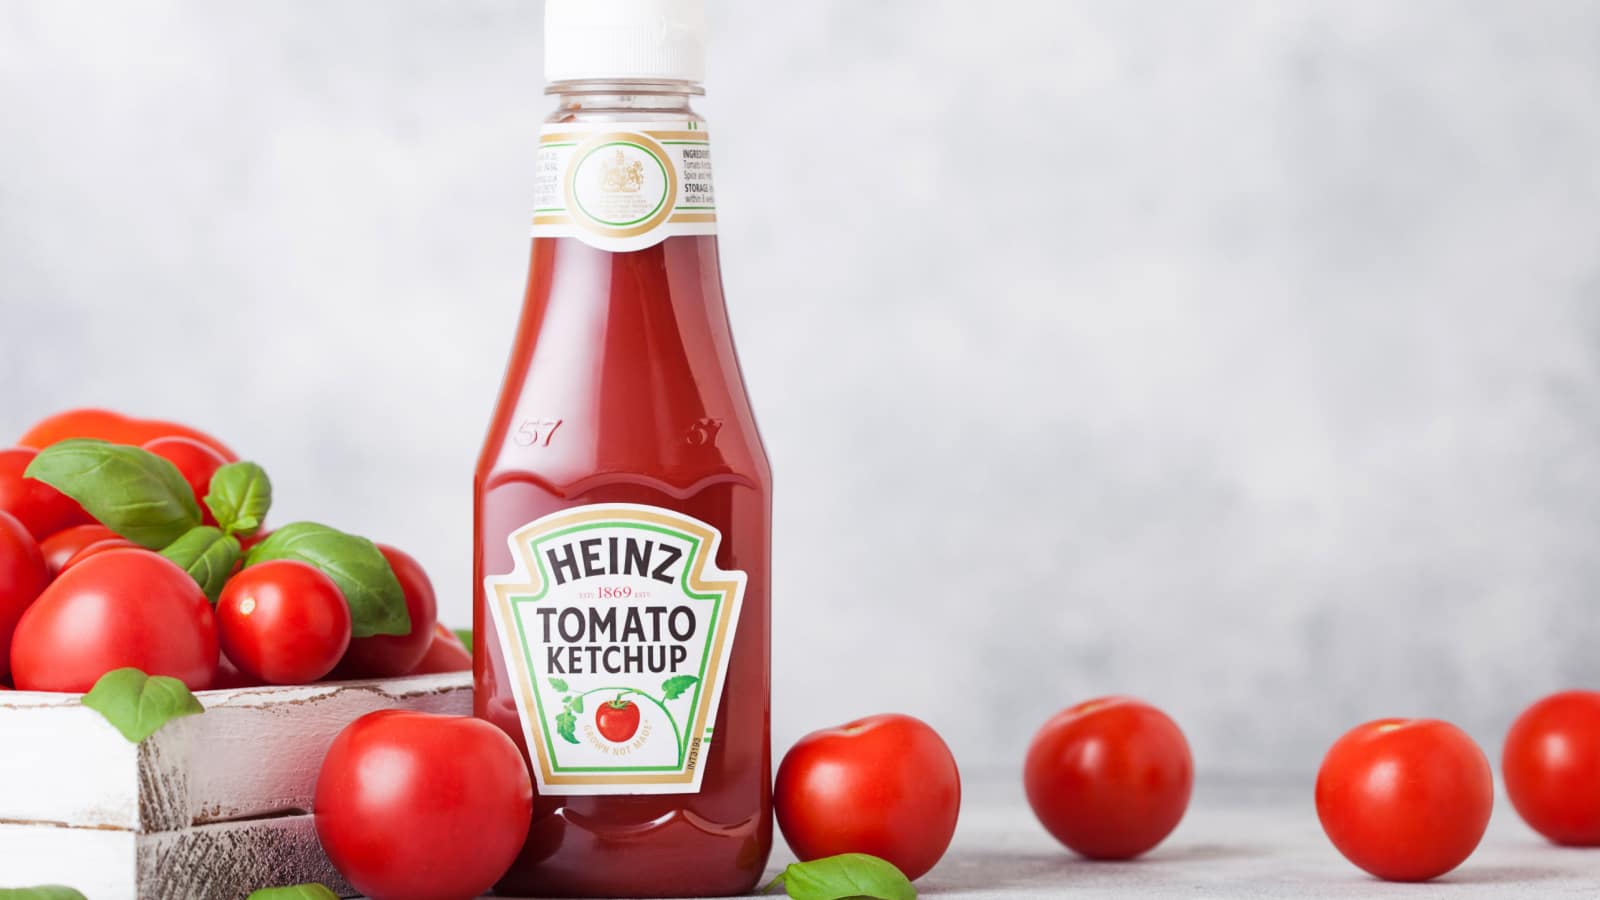 LONDON, UK - SEPTEMBER 13, 2018: Heinz ketchup with fresh raw tomatoes in box on wood background.